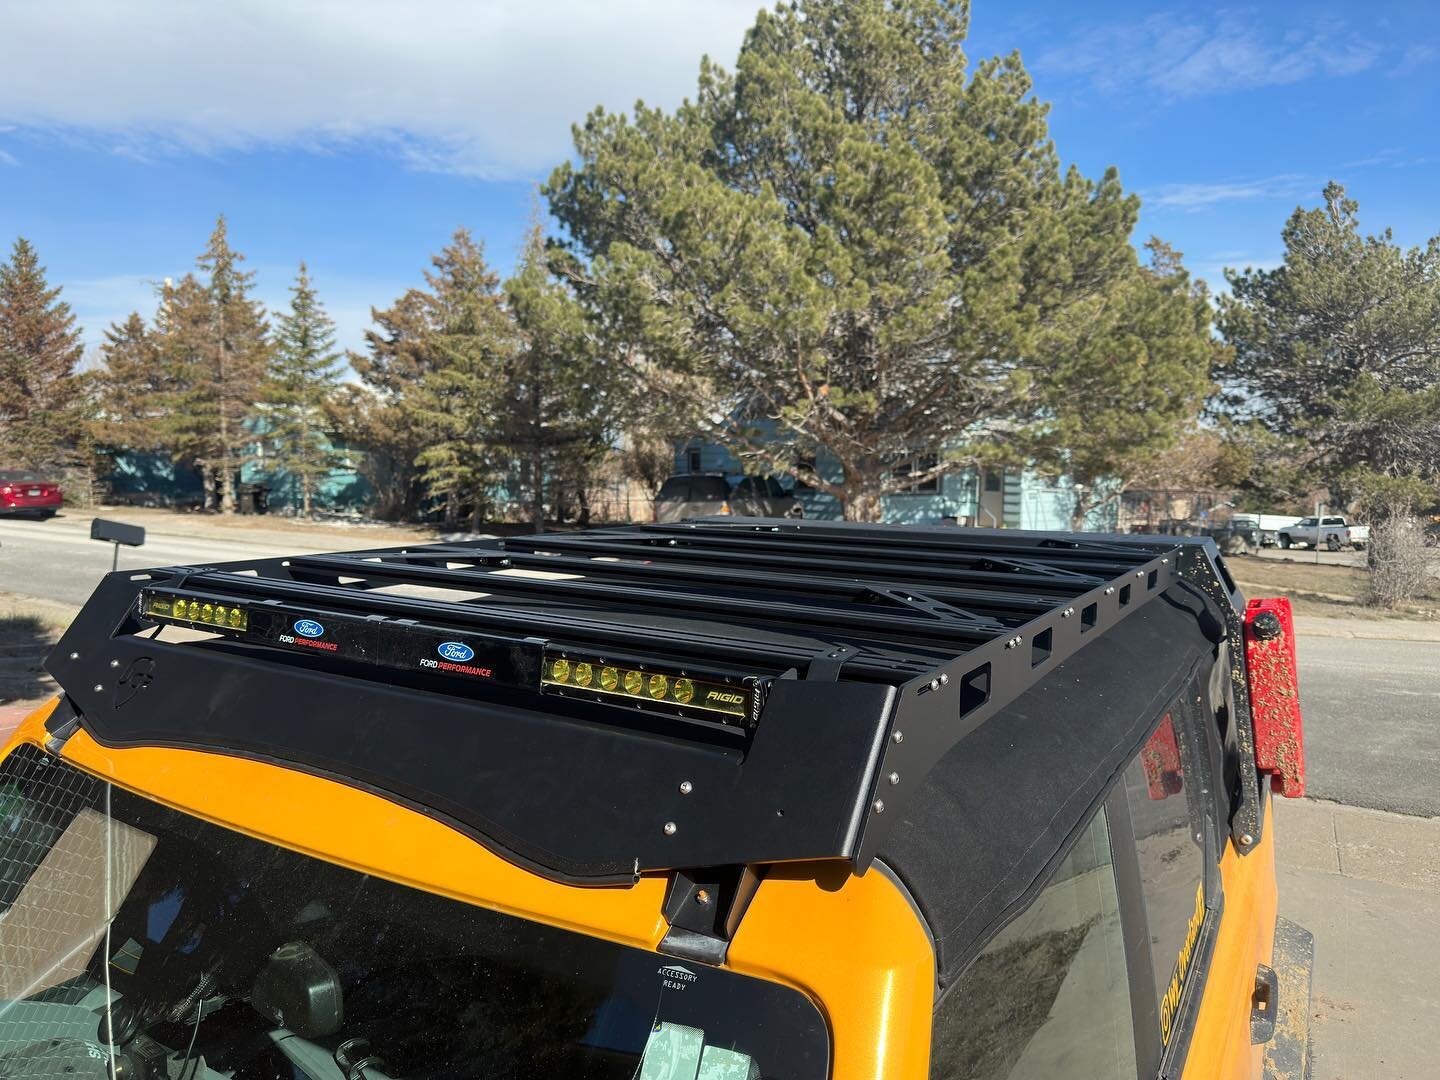 Just installed the @jcroffroad soft top rack on Bruno!

#wyoverland #wyoming #overland #fordbronco2021 #getoutside #followｍe #explore #outdoors #wyominglife